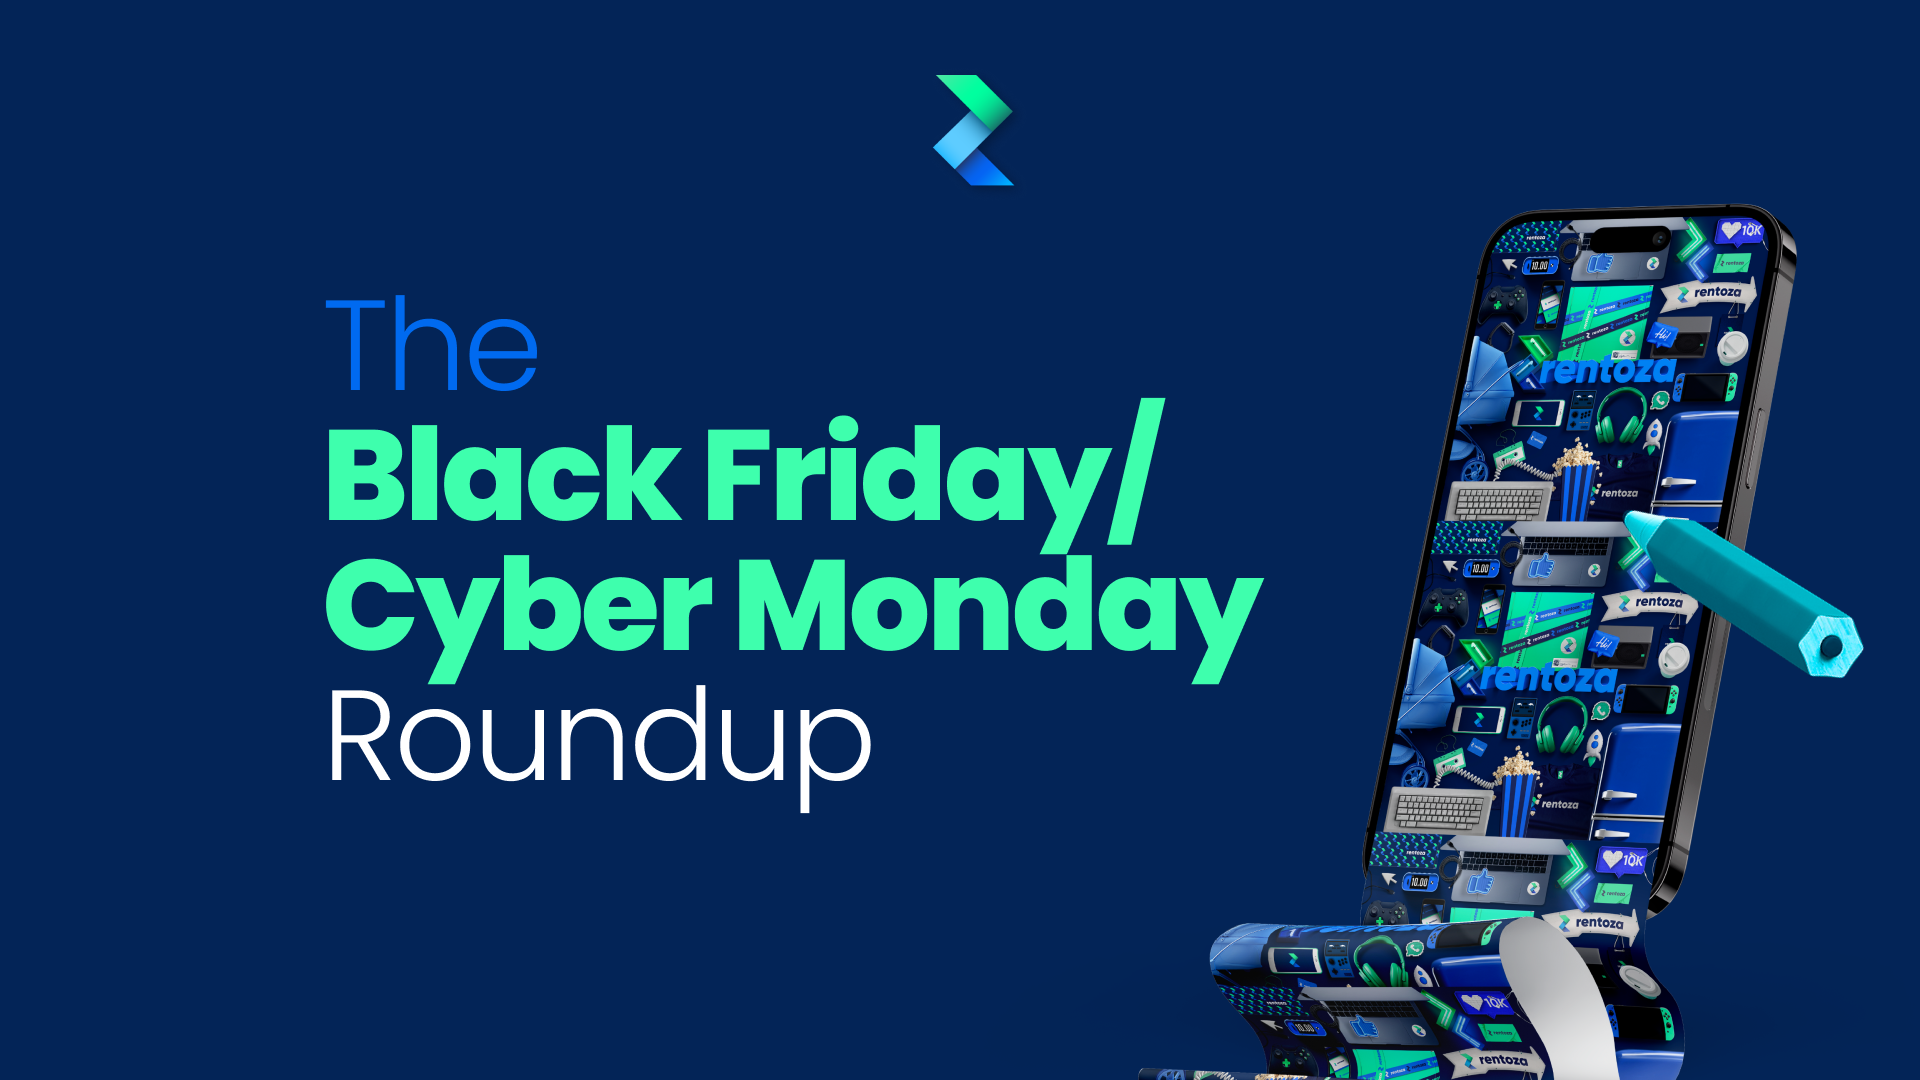 The Black Friday/Cyber Monday Roundup